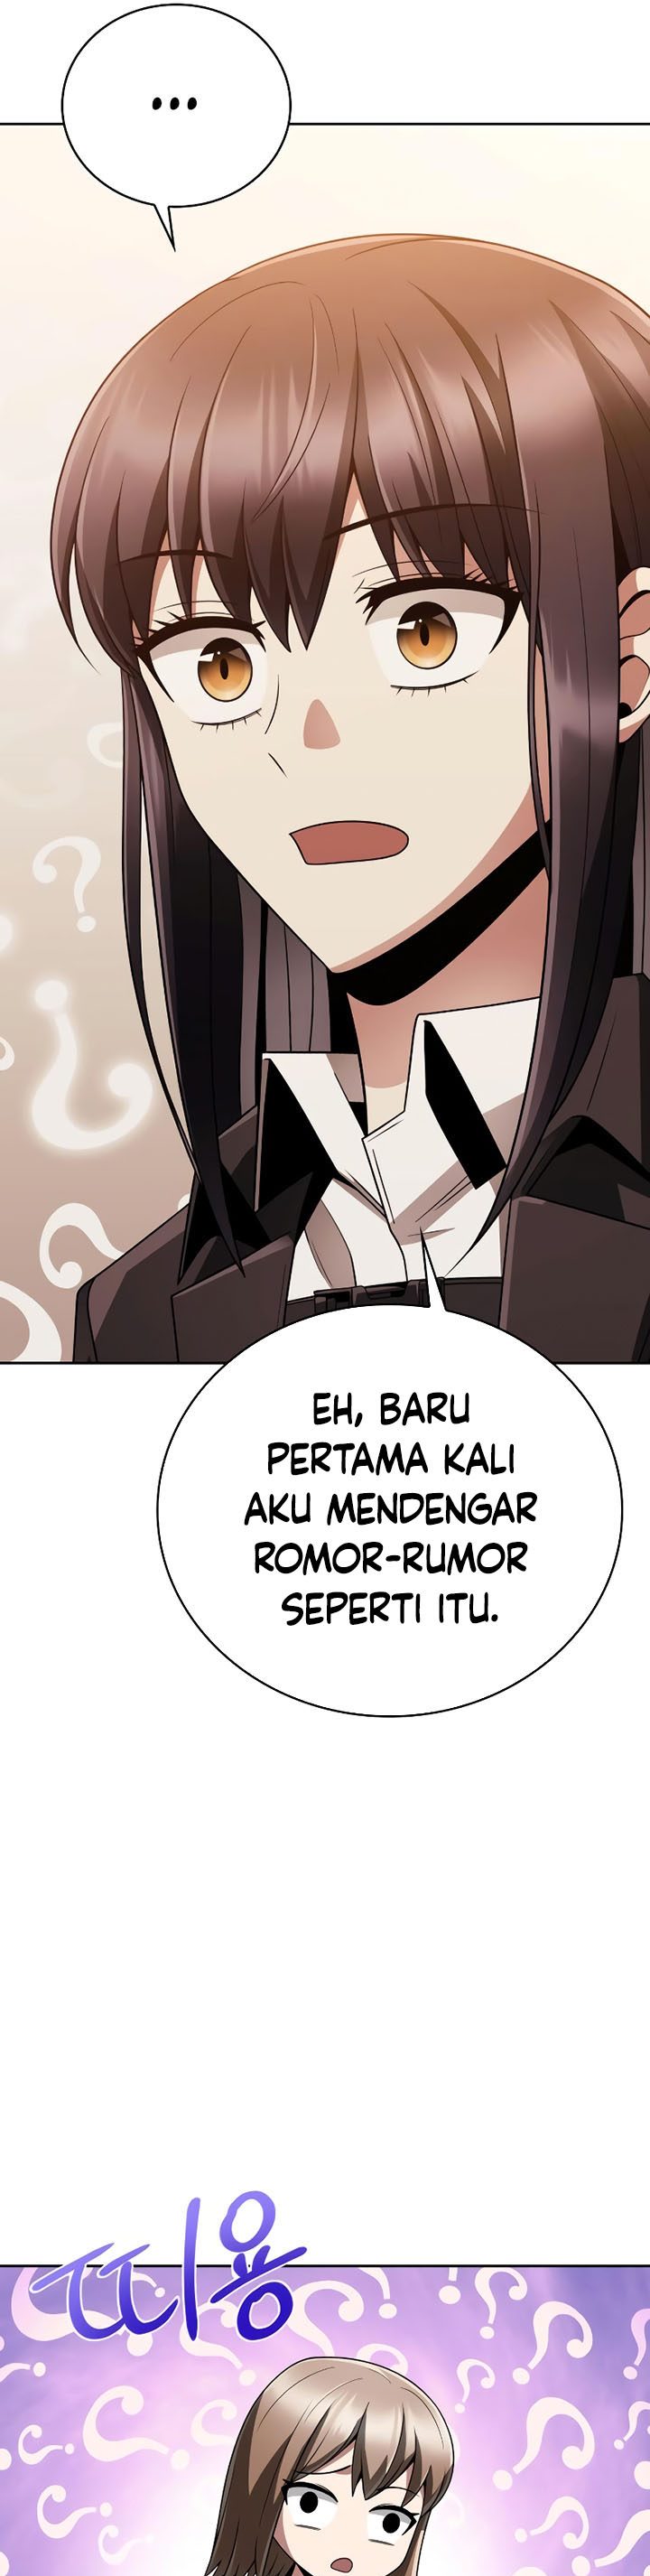 Dilarang COPAS - situs resmi www.mangacanblog.com - Komik clever cleaning life of the returned genius hunter 020 - chapter 20 21 Indonesia clever cleaning life of the returned genius hunter 020 - chapter 20 Terbaru 25|Baca Manga Komik Indonesia|Mangacan